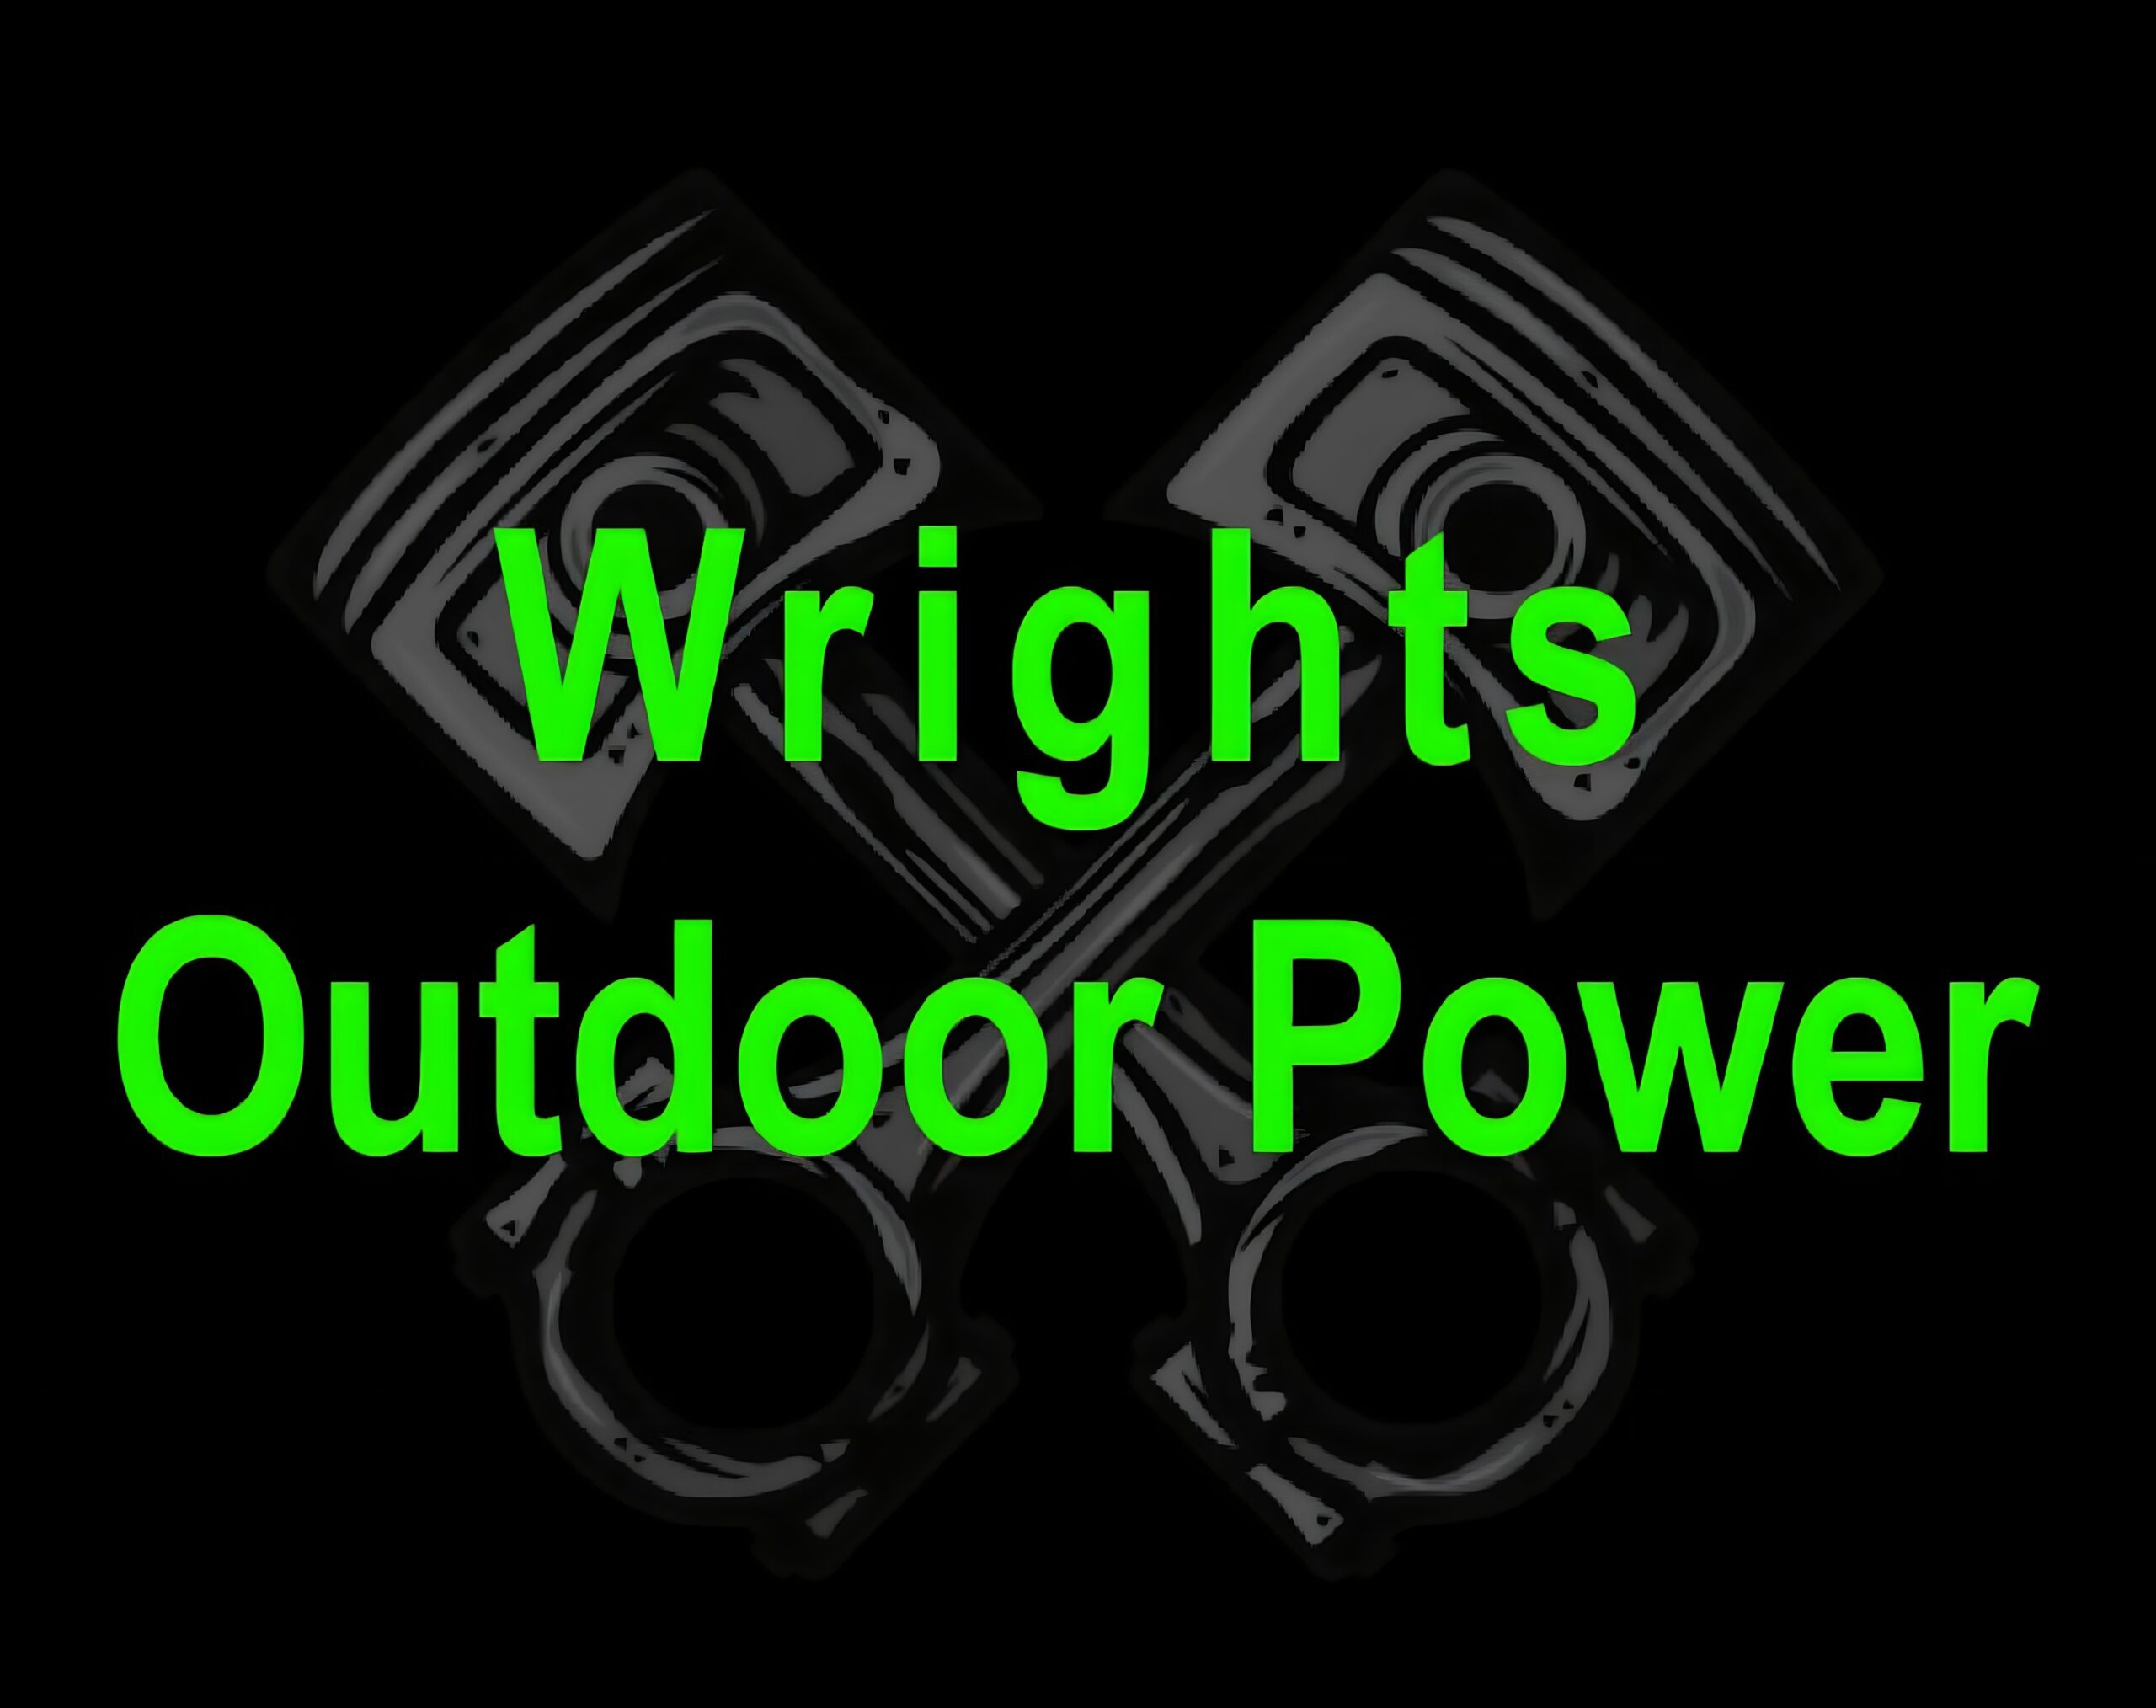 Wrights outdoor power logo